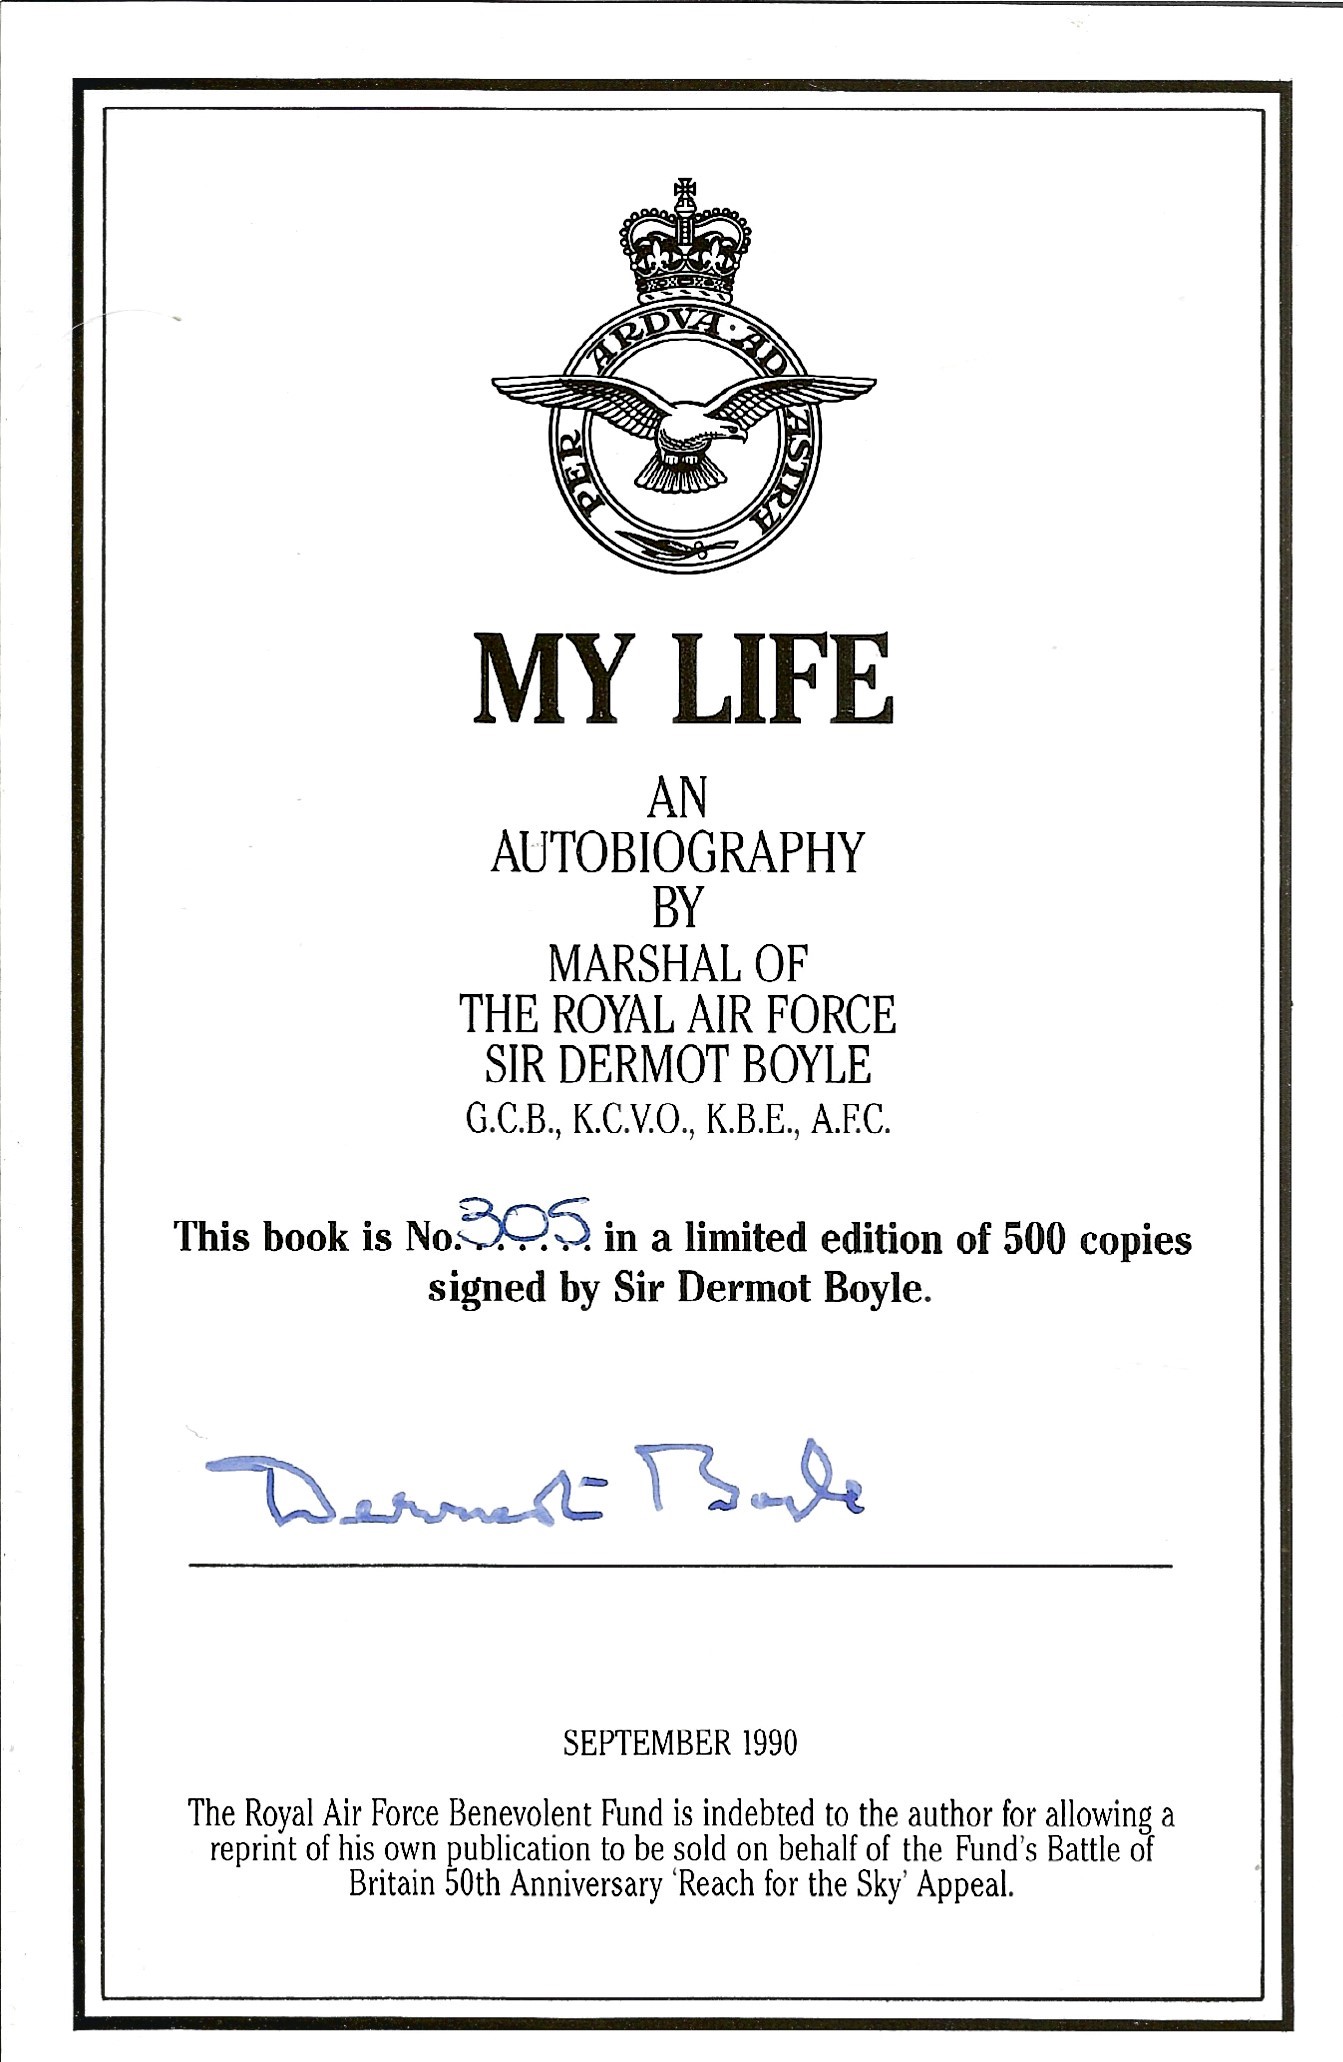 Dermot Boyle. My Life. A WW2 hardback limited edition book, No 305 of 500. in great condition. - Image 2 of 2